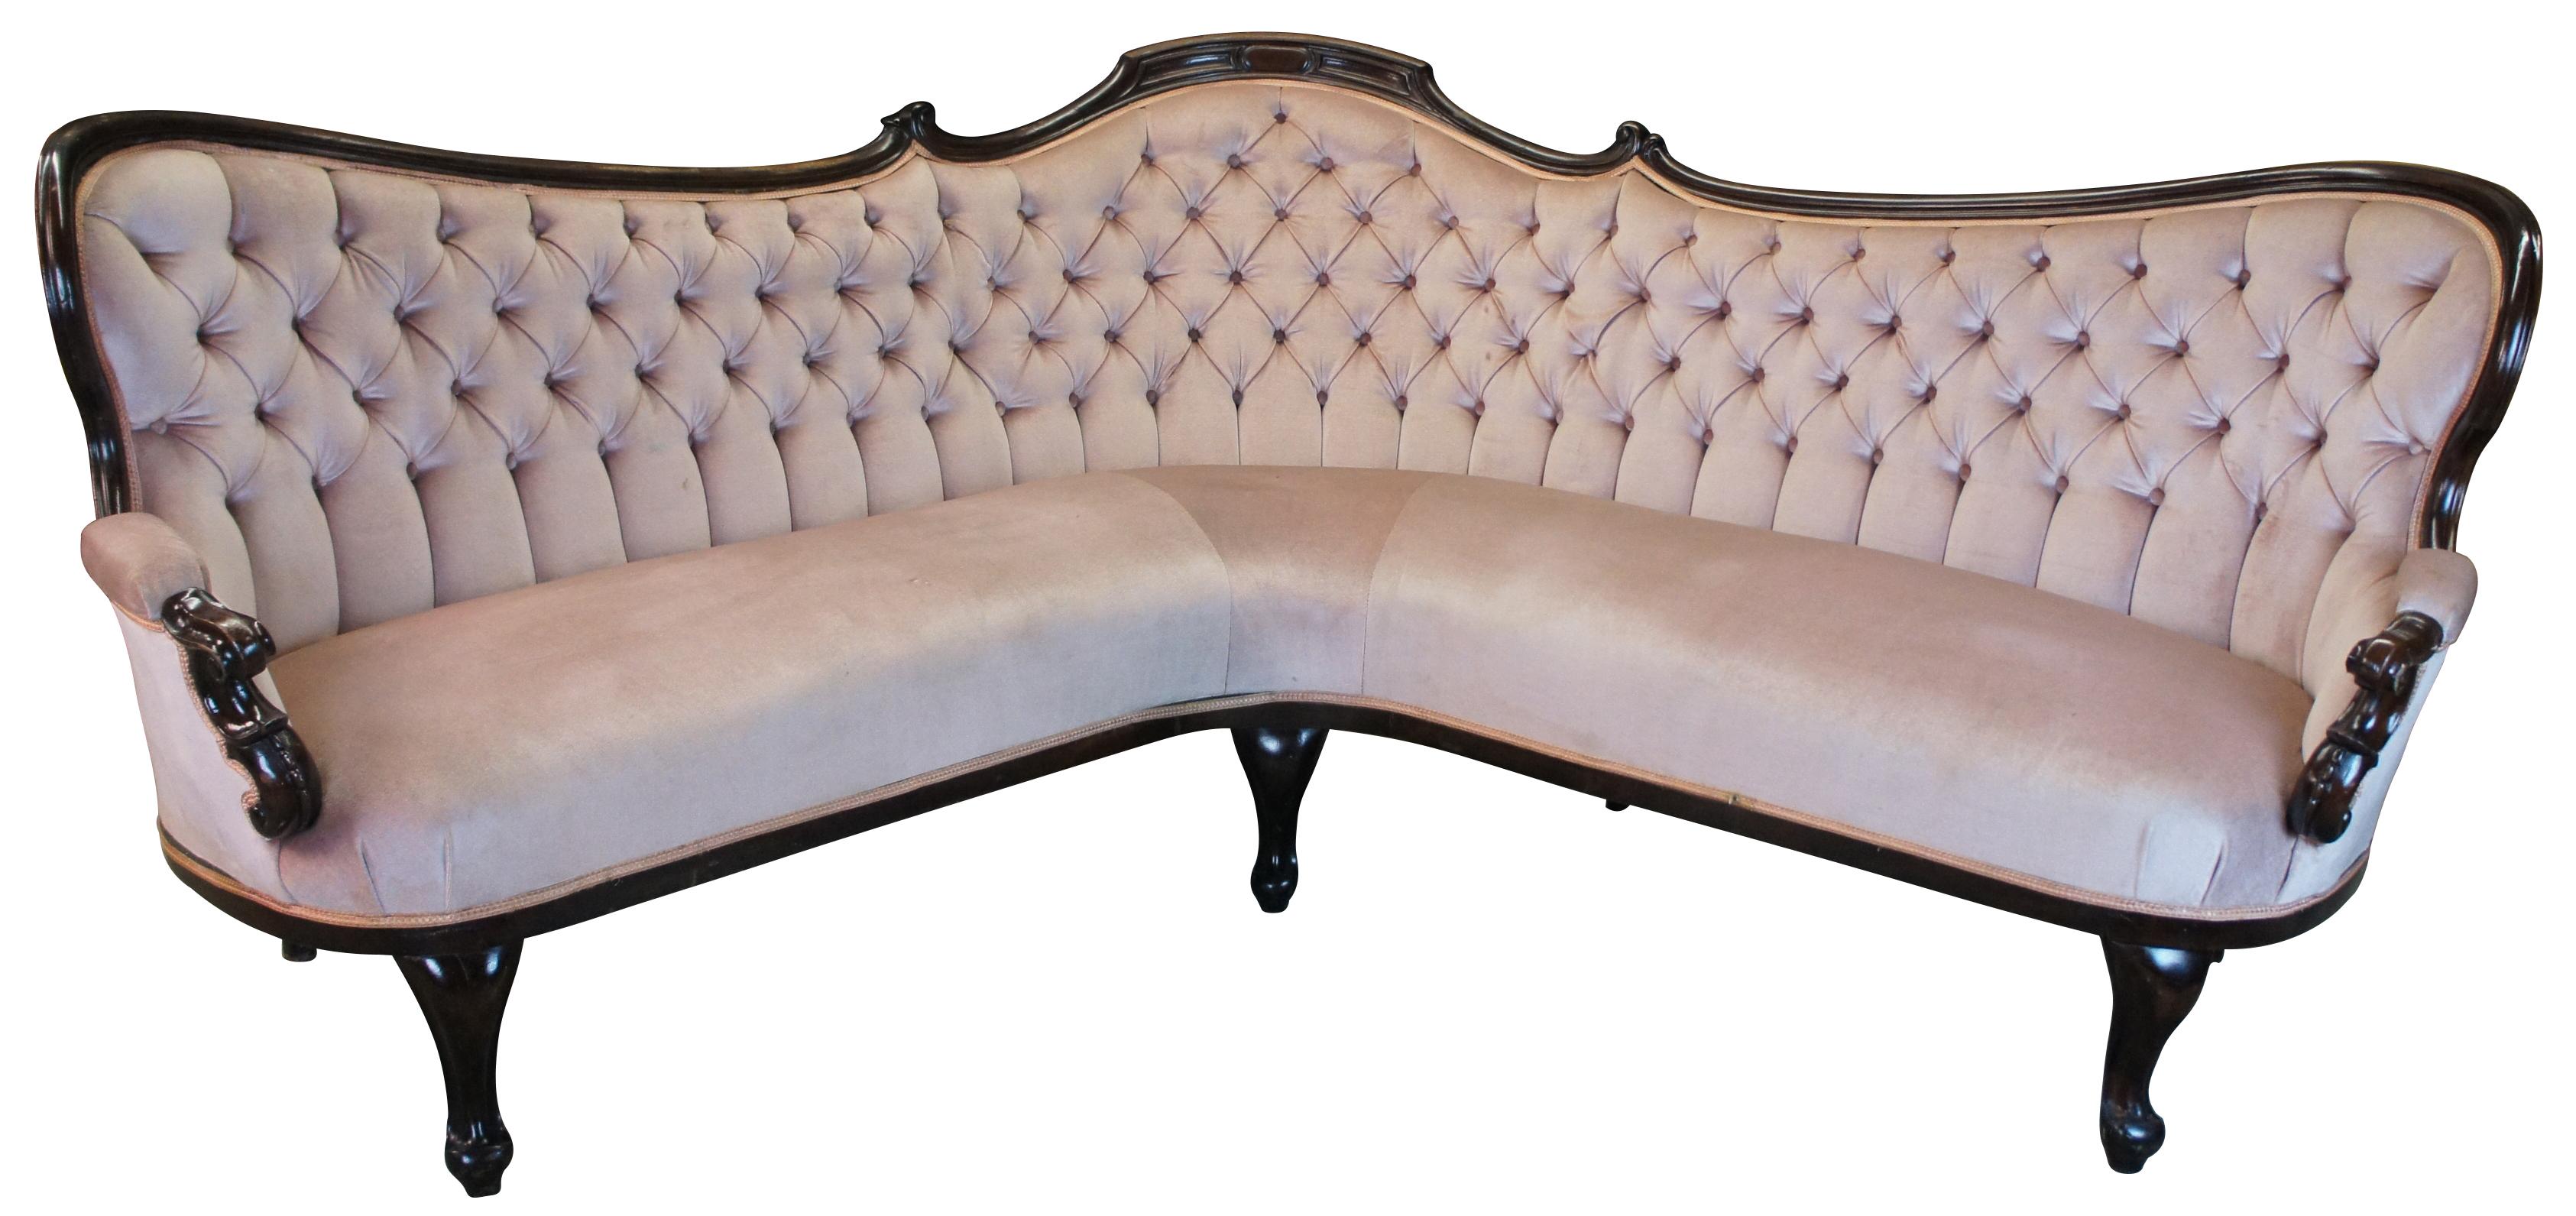 Monumental Victorian corner parlor sofa featuring serpentine walnut frame with S scroll carved and padded arms. Features queen anne legs and tufted upholstery. Circa 1870s

102